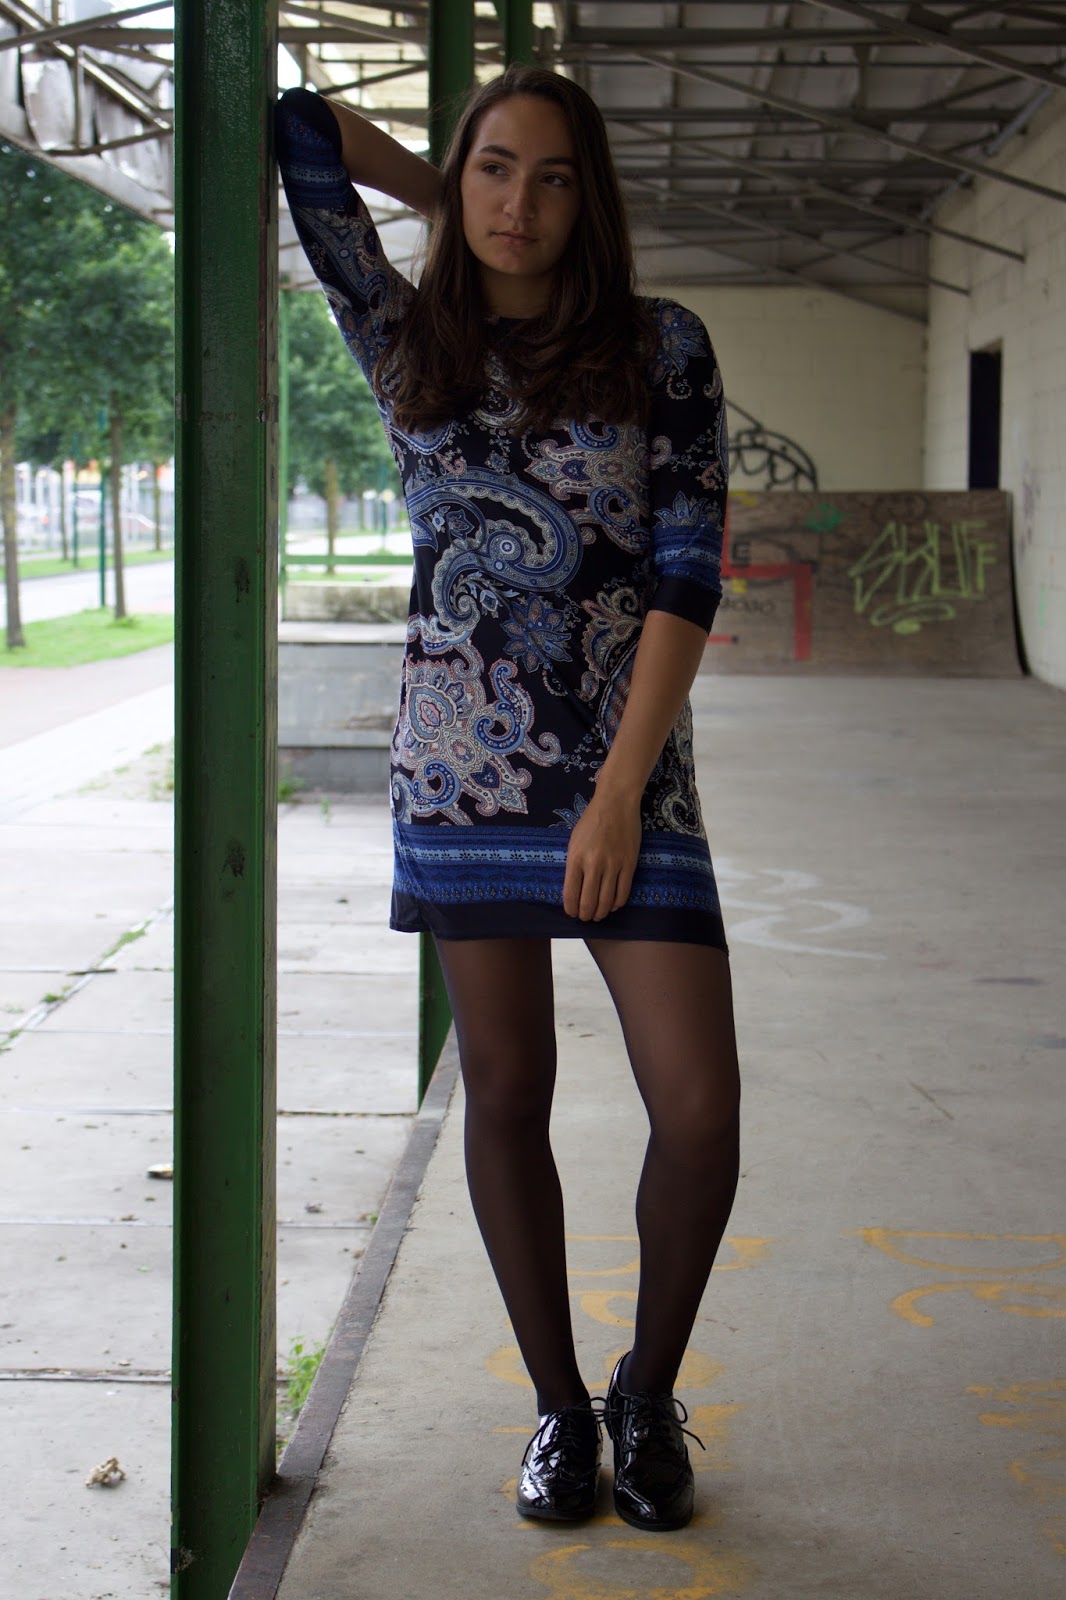 OUTFIT: THE LADY BOSS - Fashionmylegs : The tights and hosiery blog